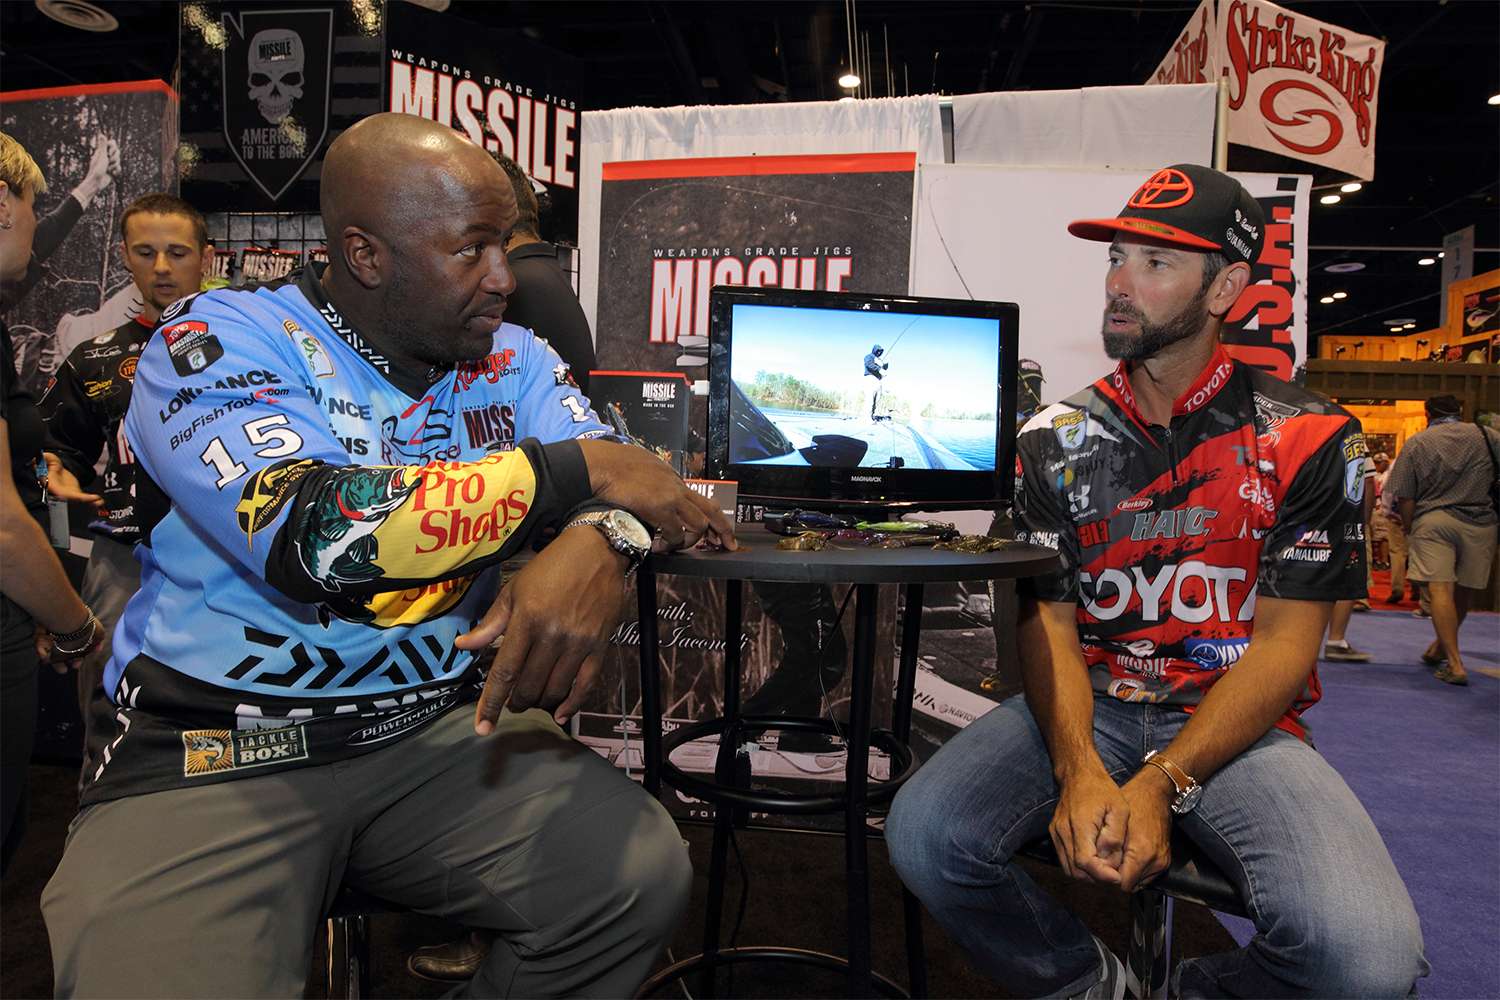 Ish Monroe and Mike Iaconelli sit in to help buddy John Crews launch Missiles.